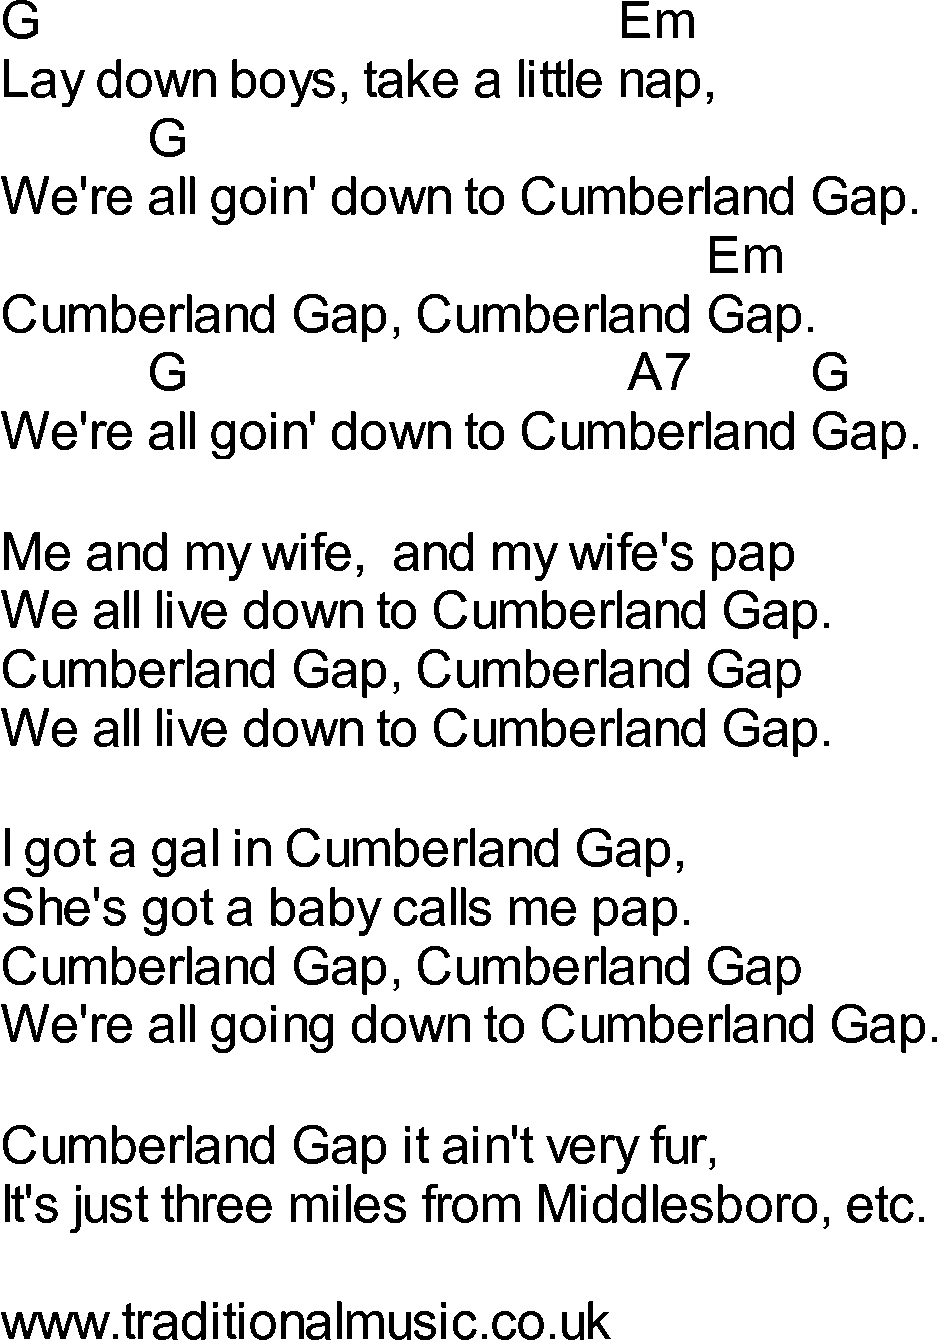 Bluegrass songs with chords - Cumberland Gap